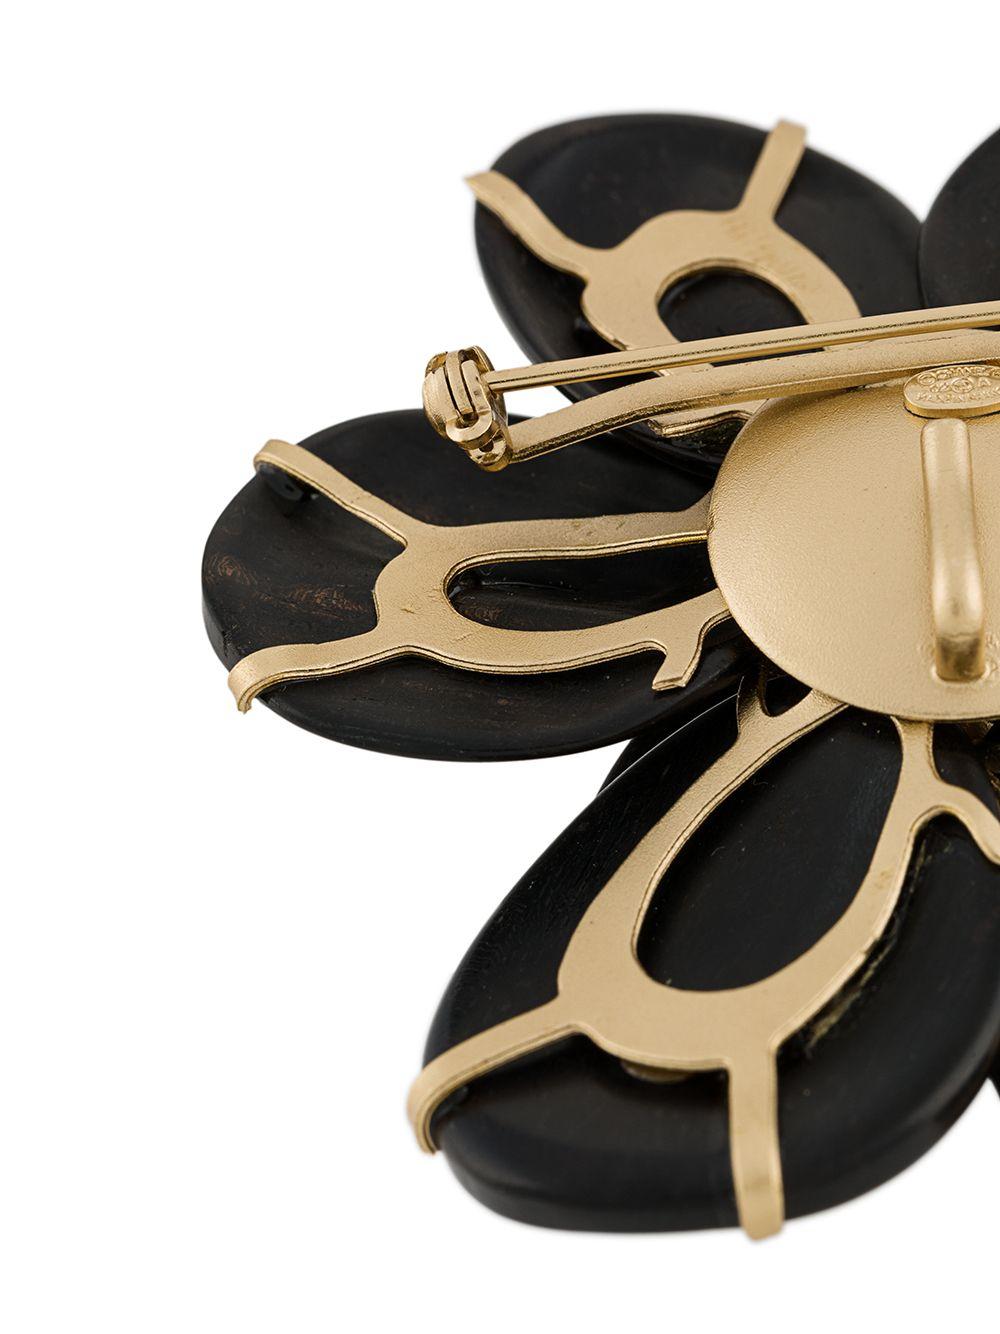 Crafted in France from an intricate combination of gold-plated metal and dark-coloured wood, this vintage 2002 brooch from Chanel features a black wooden petal design, rhinestone embellishments decorating the CC embellished centre and a practical